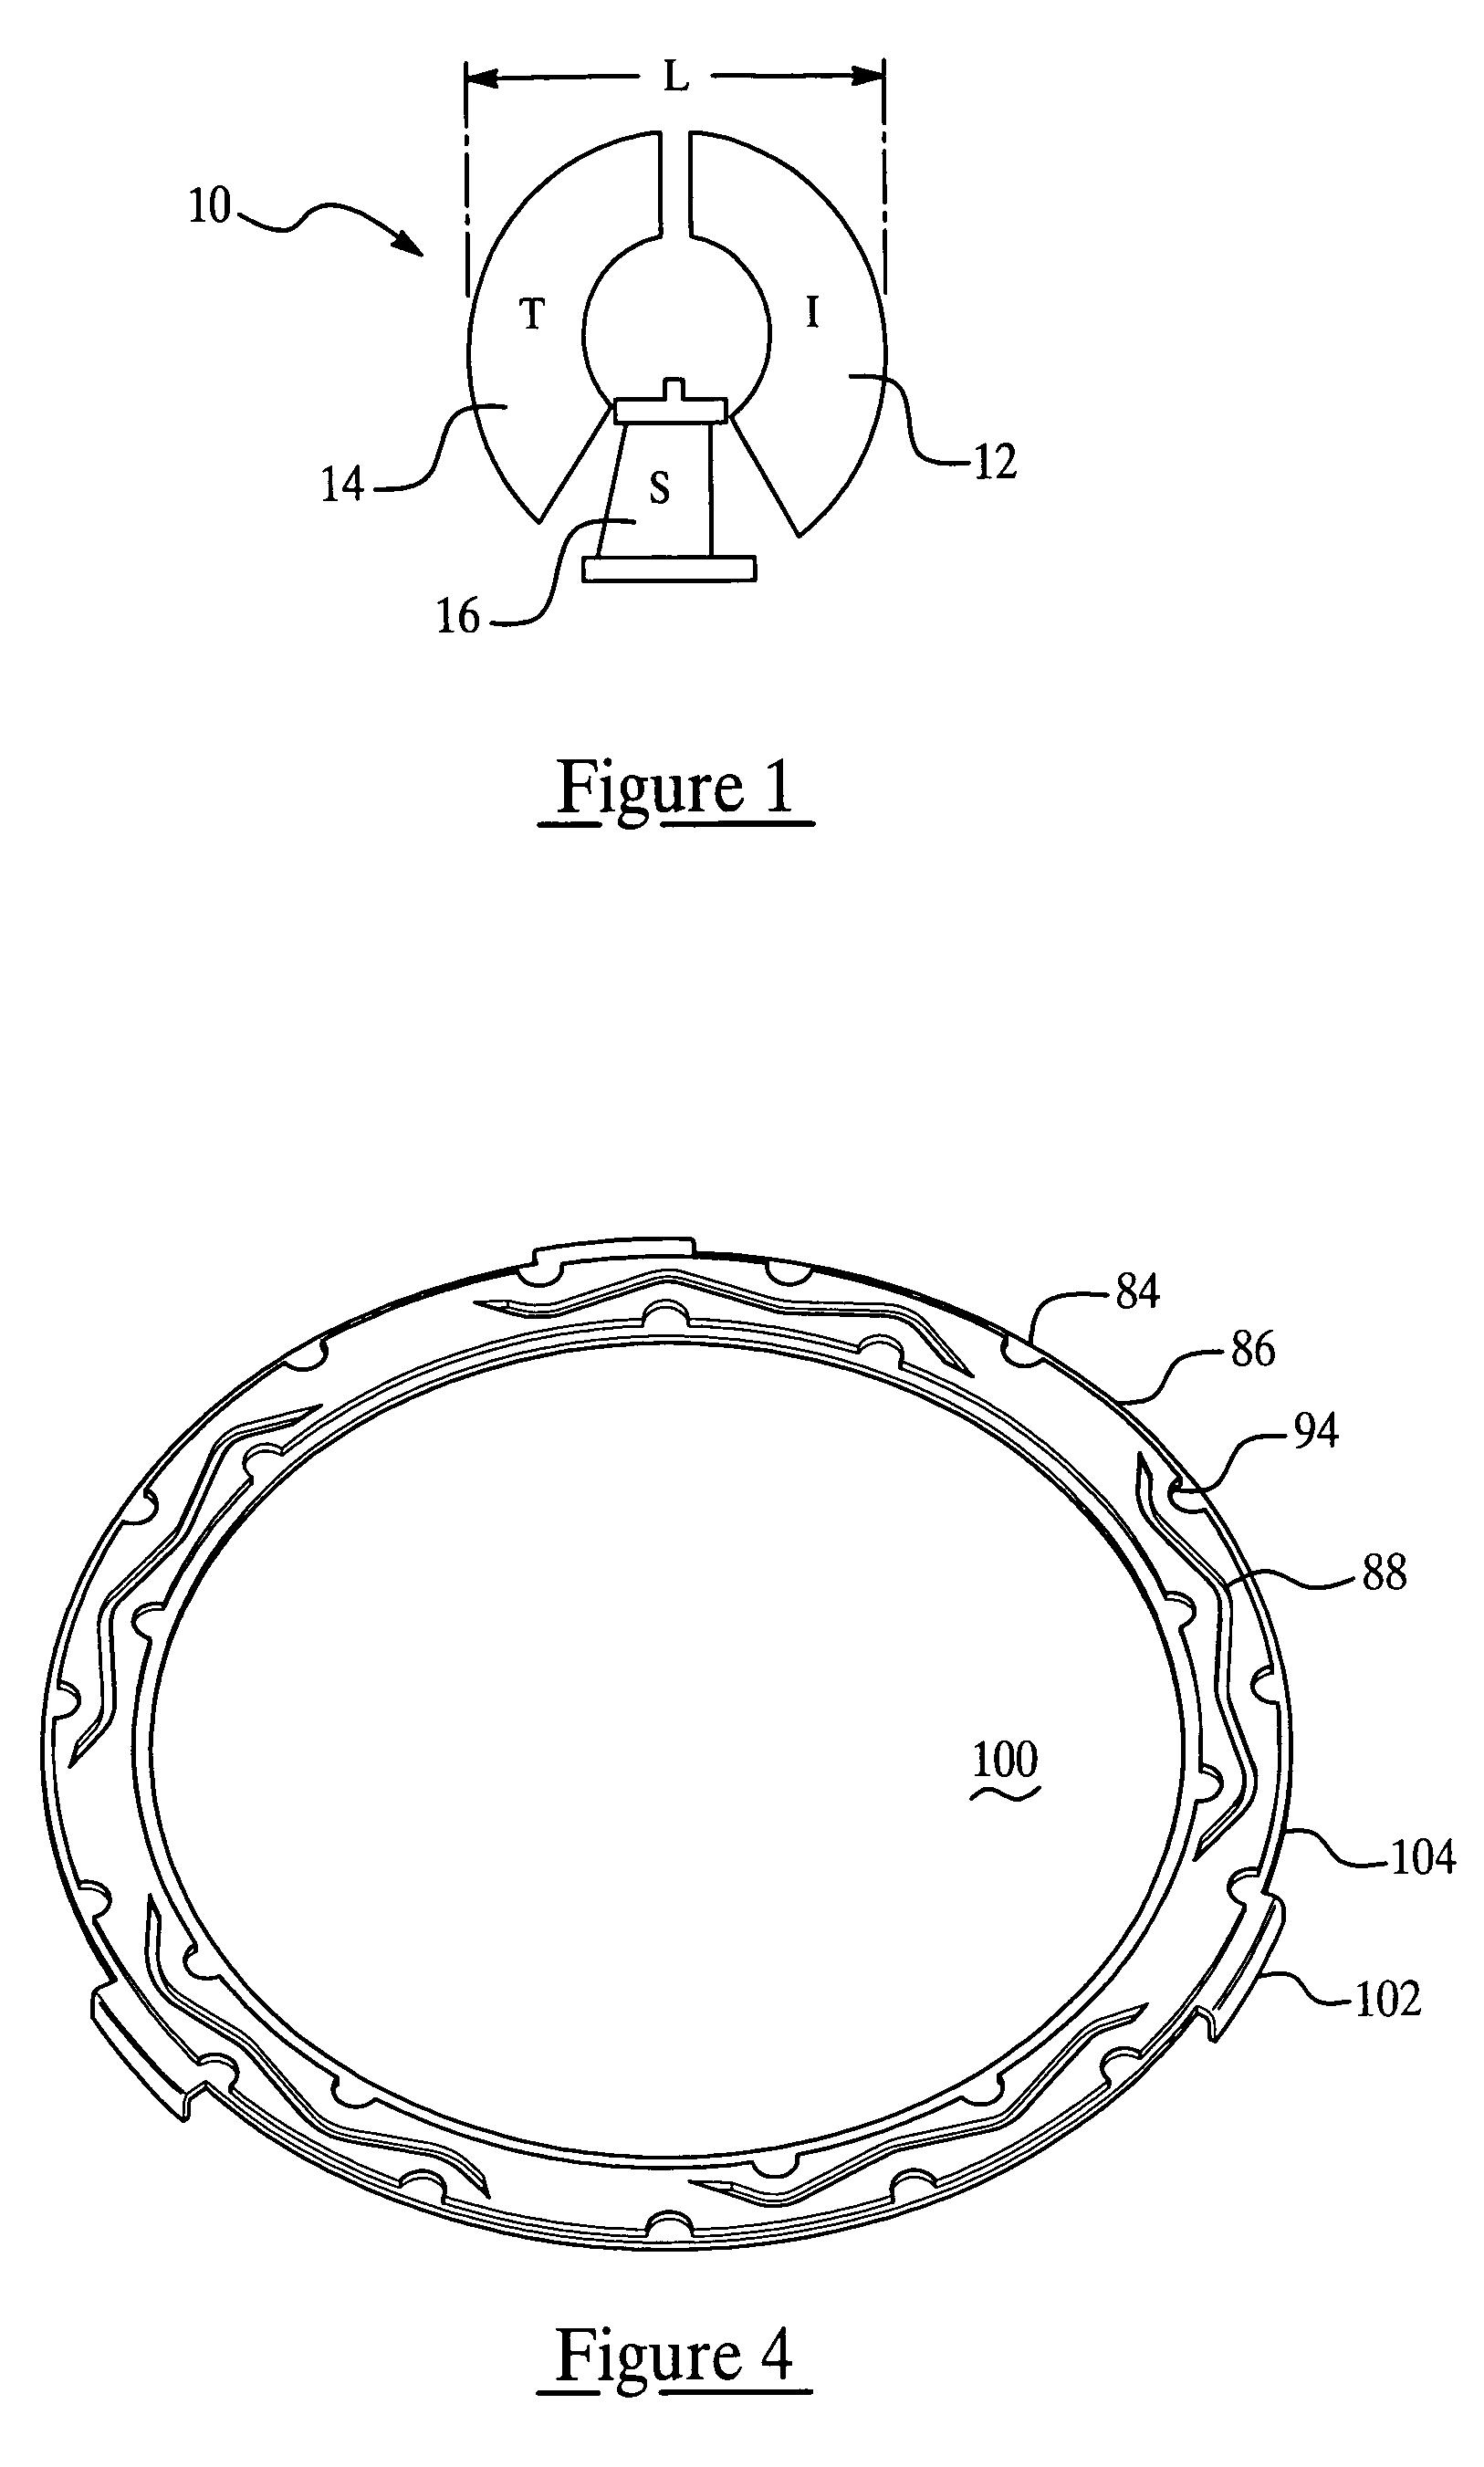 Torque converter with a lock-up clutch assembly having a floating friction disk